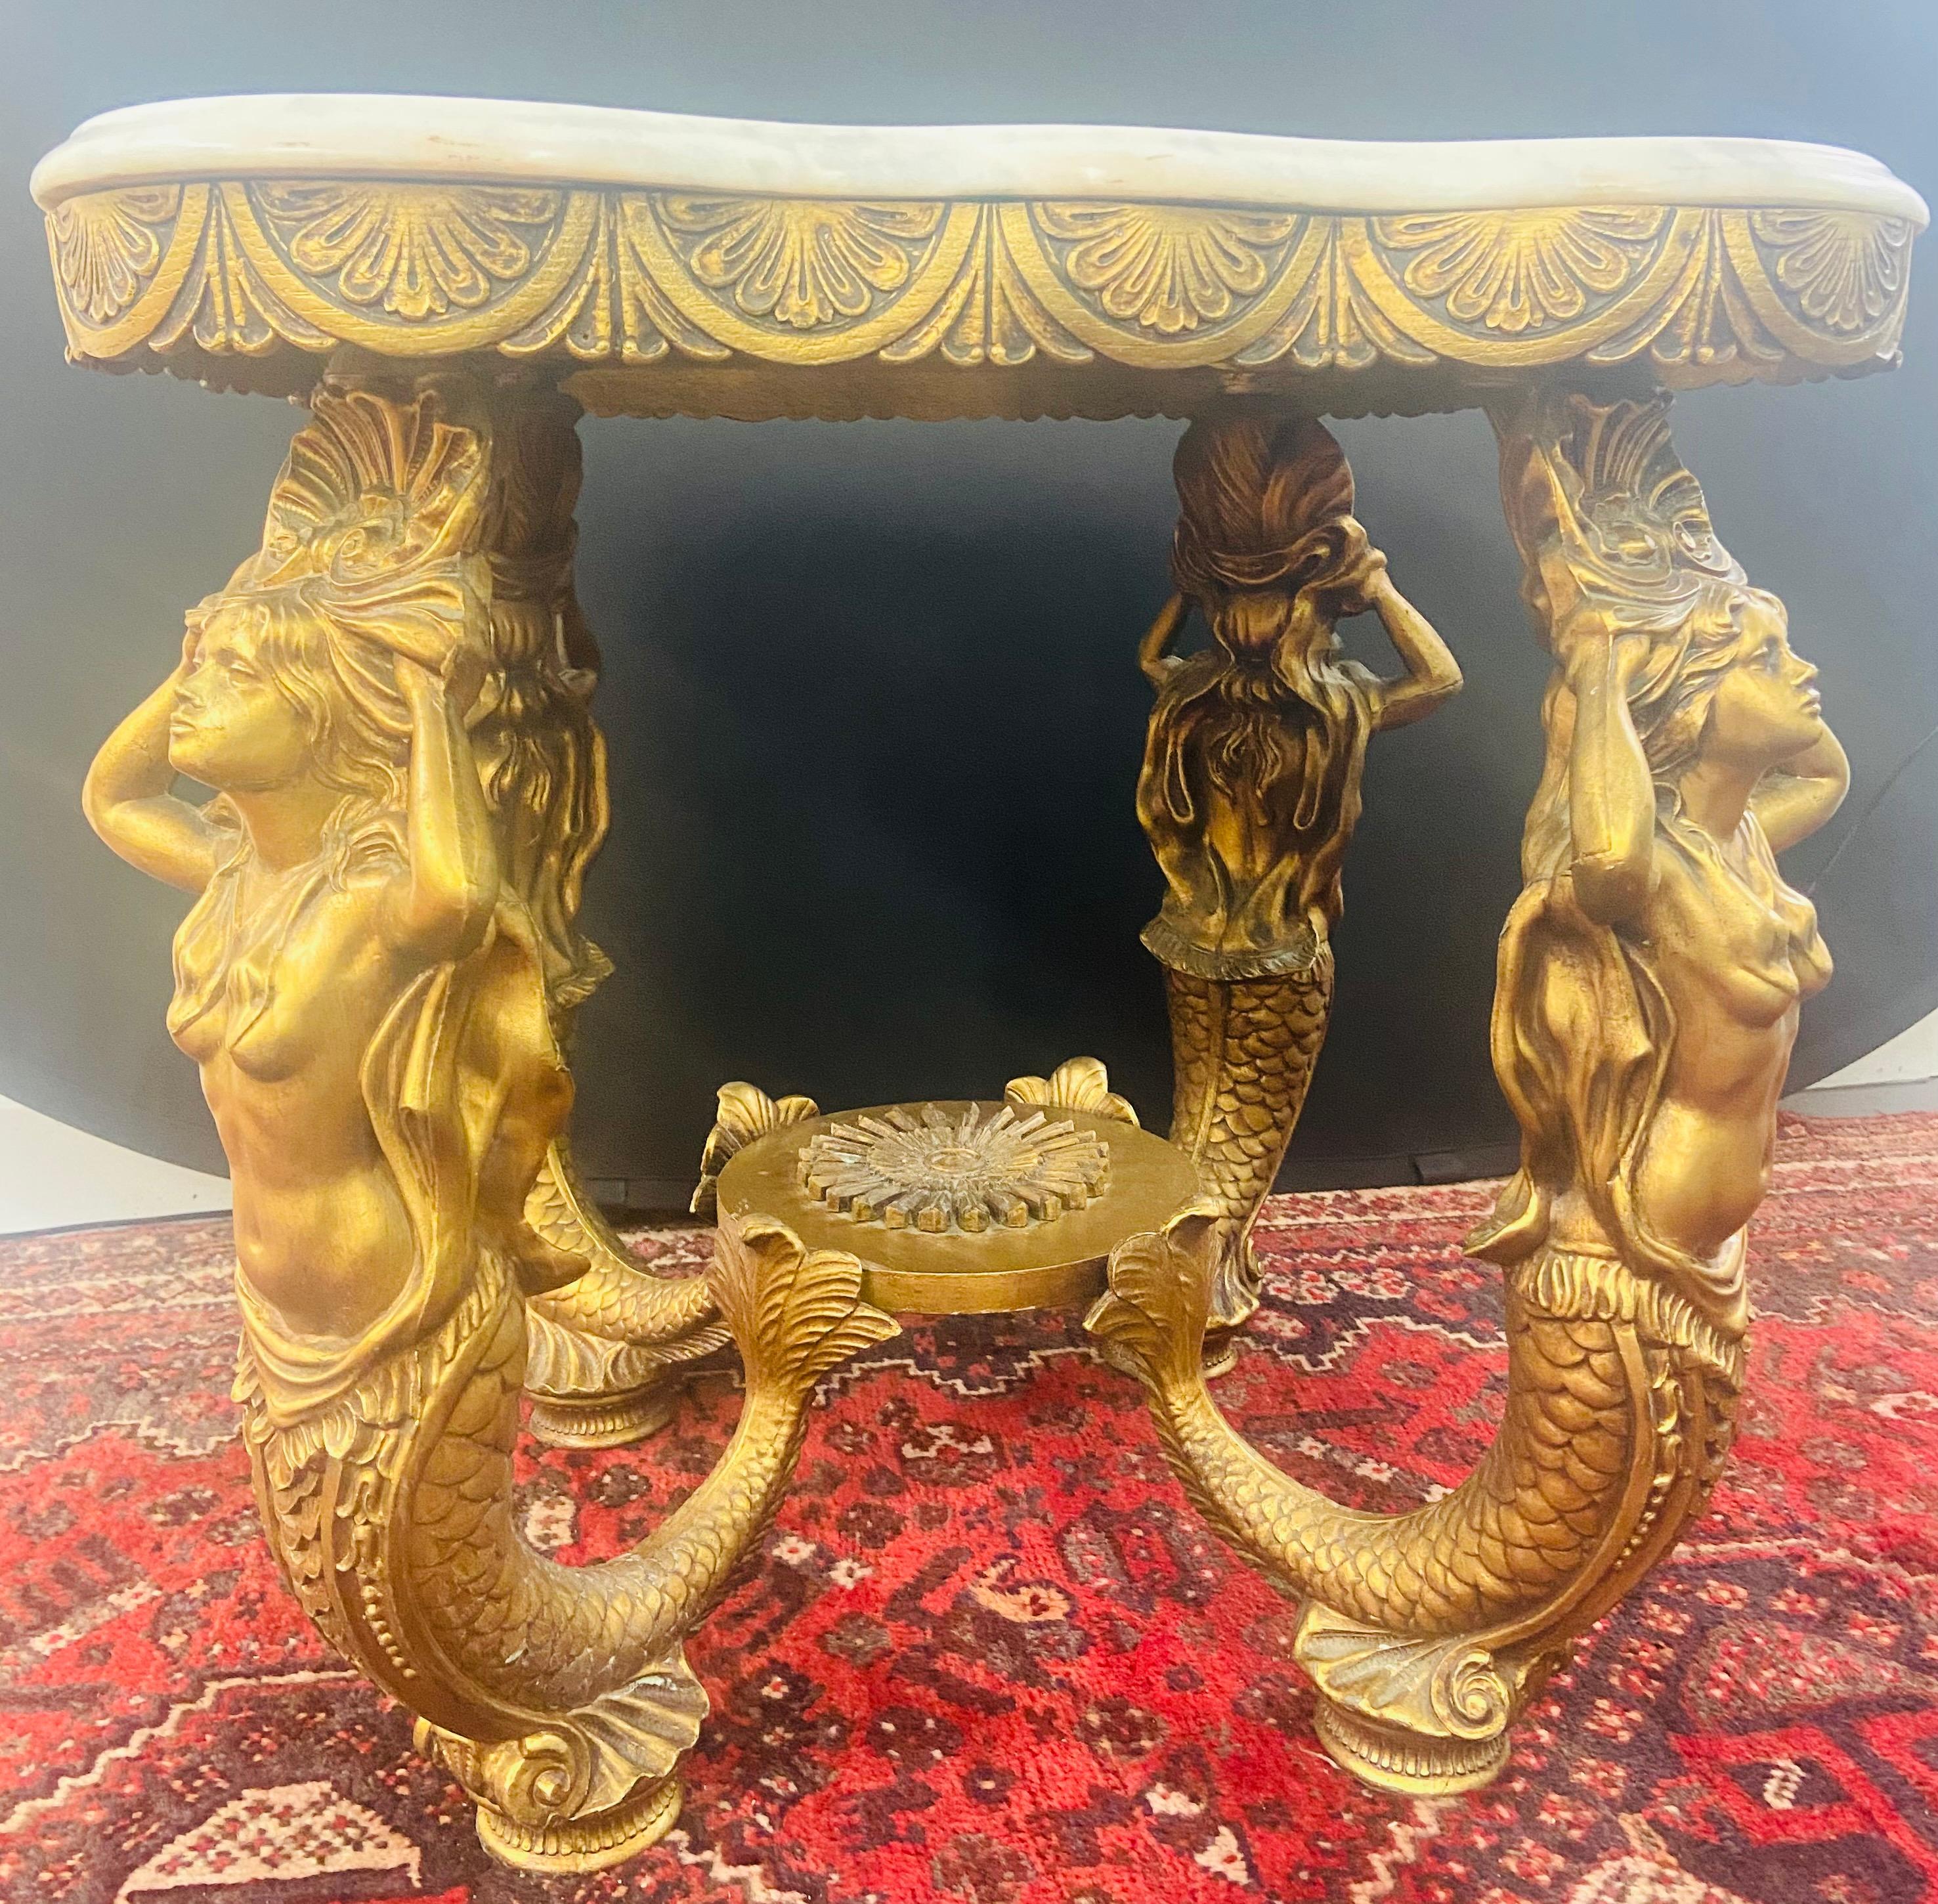 This stunning pair of end or side tables are undoubtedly exceptional art and collectible pieces. The table base features a four brass myth mermaid sculpture on each corner, a result of a labor intensive and time consuming hand sculpting and cast